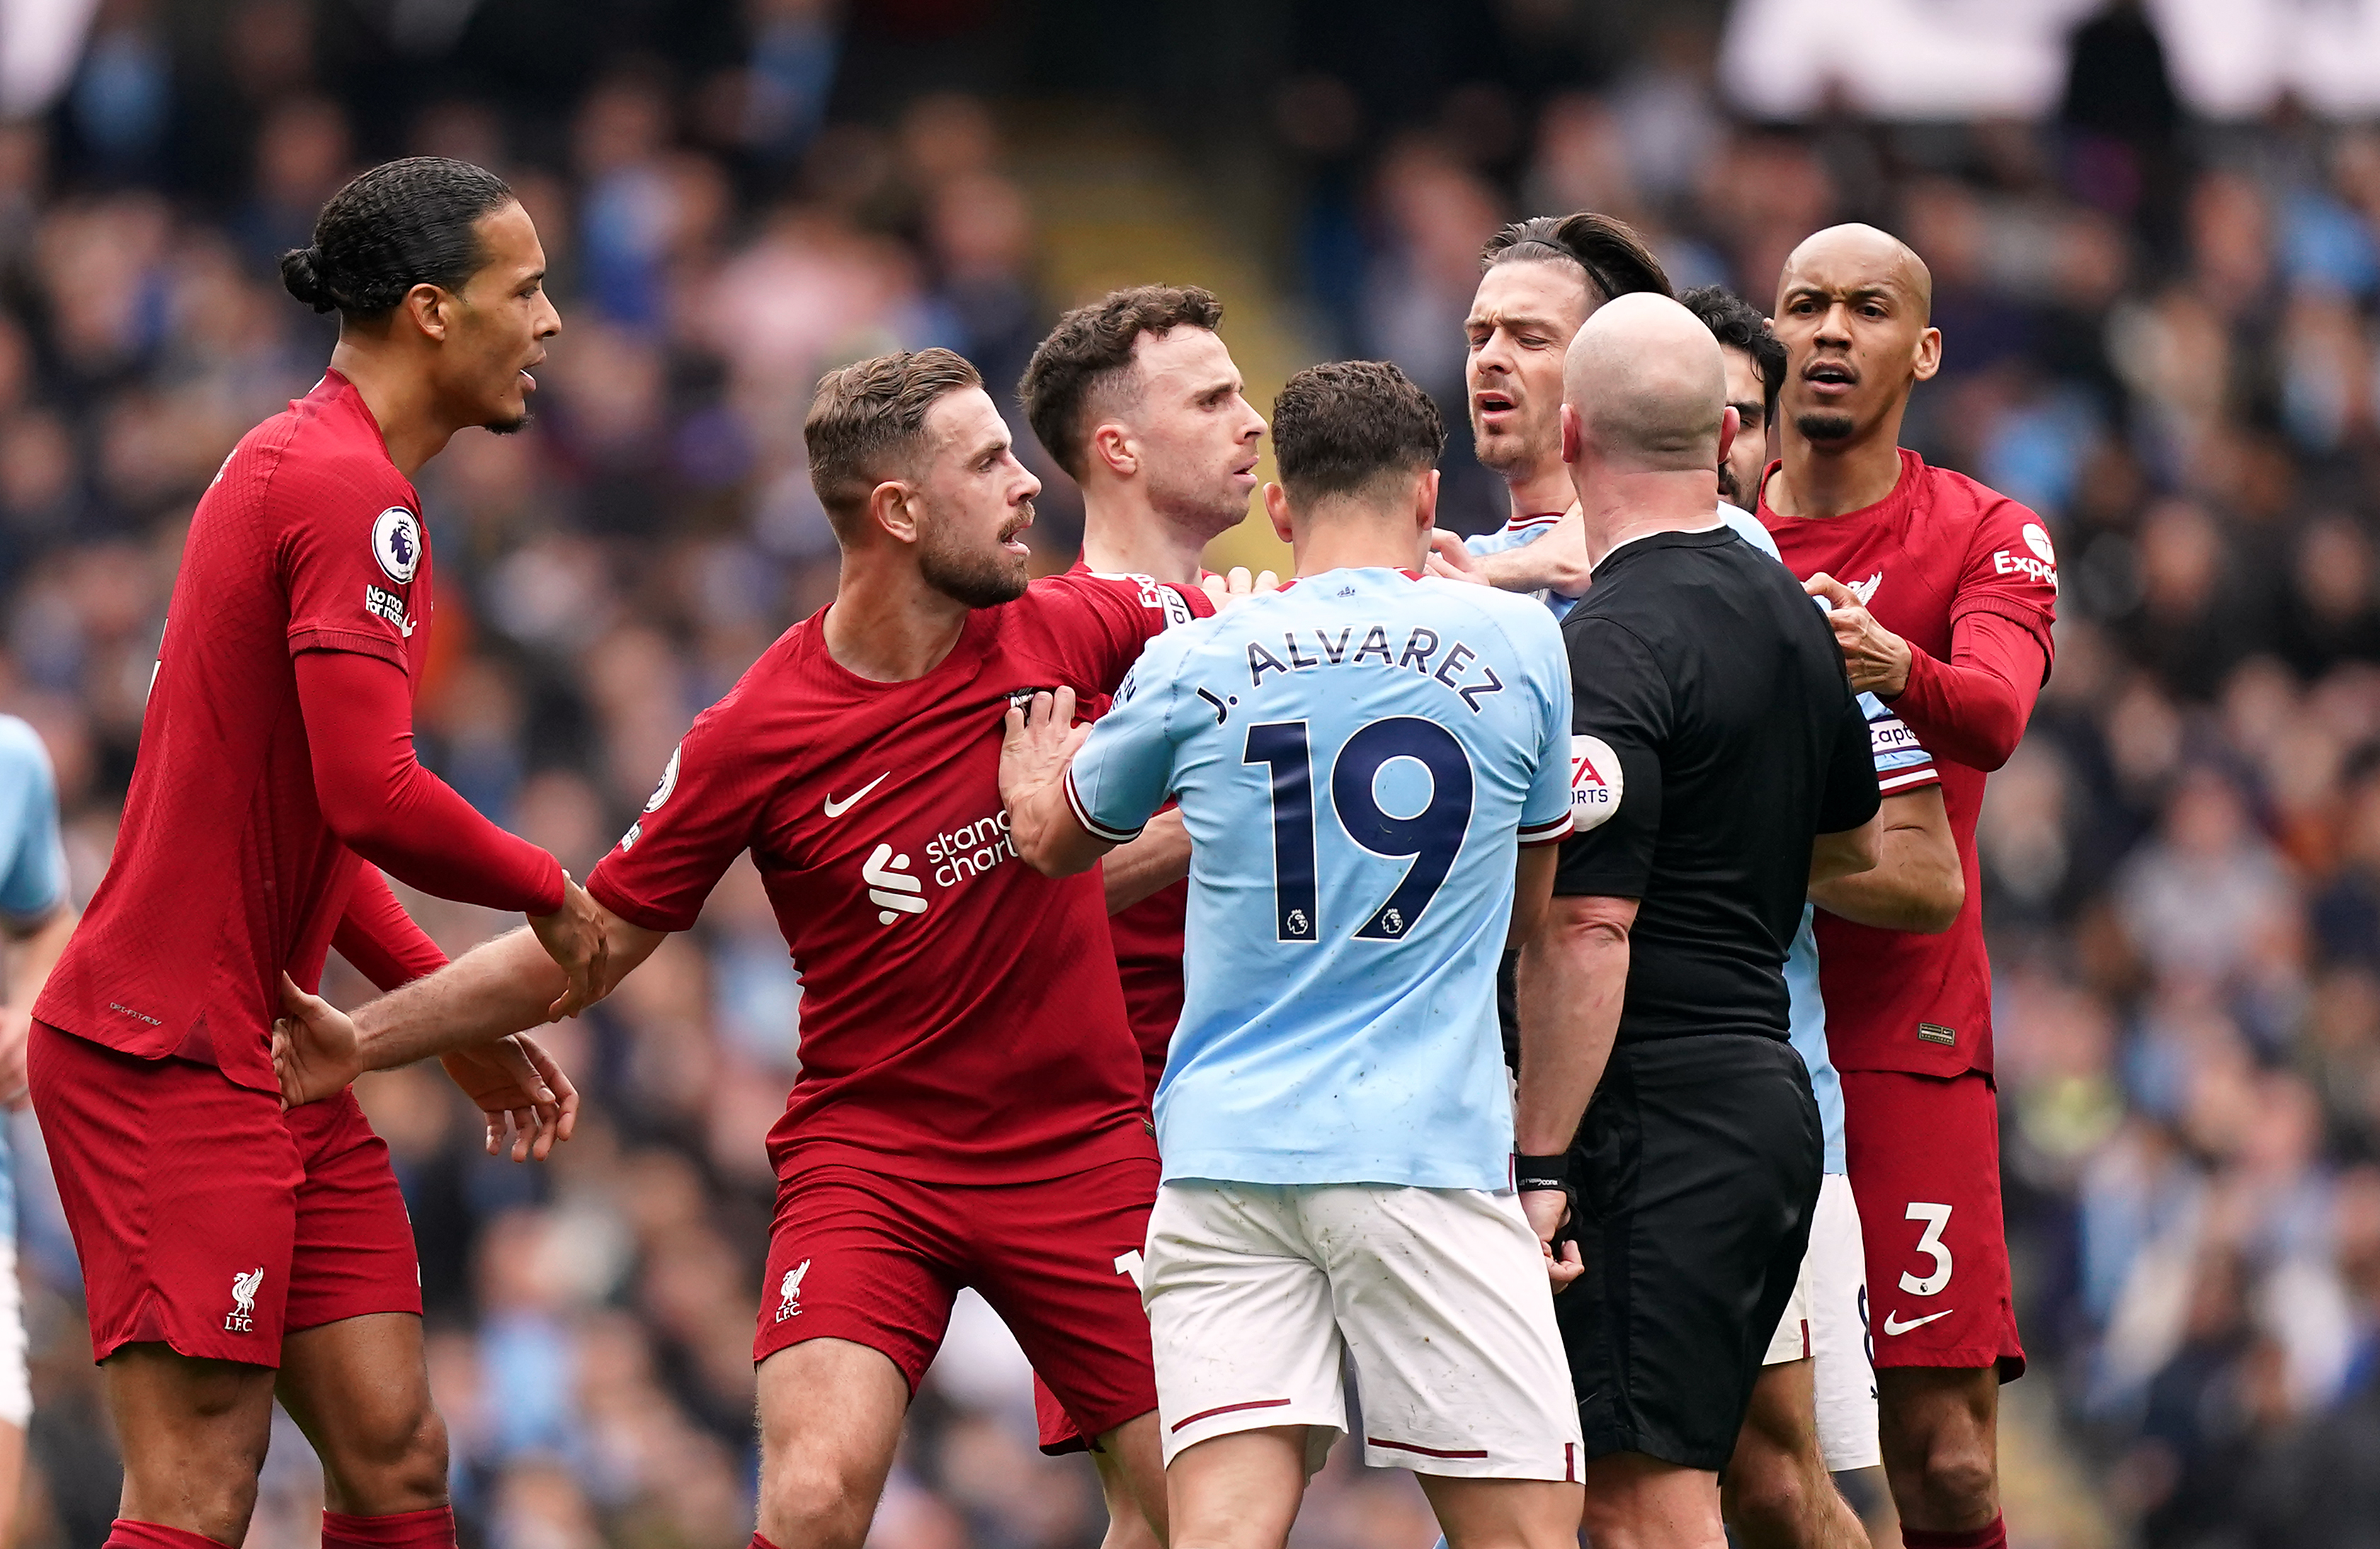 Players surround referees could be a thing of the past if they are replaced